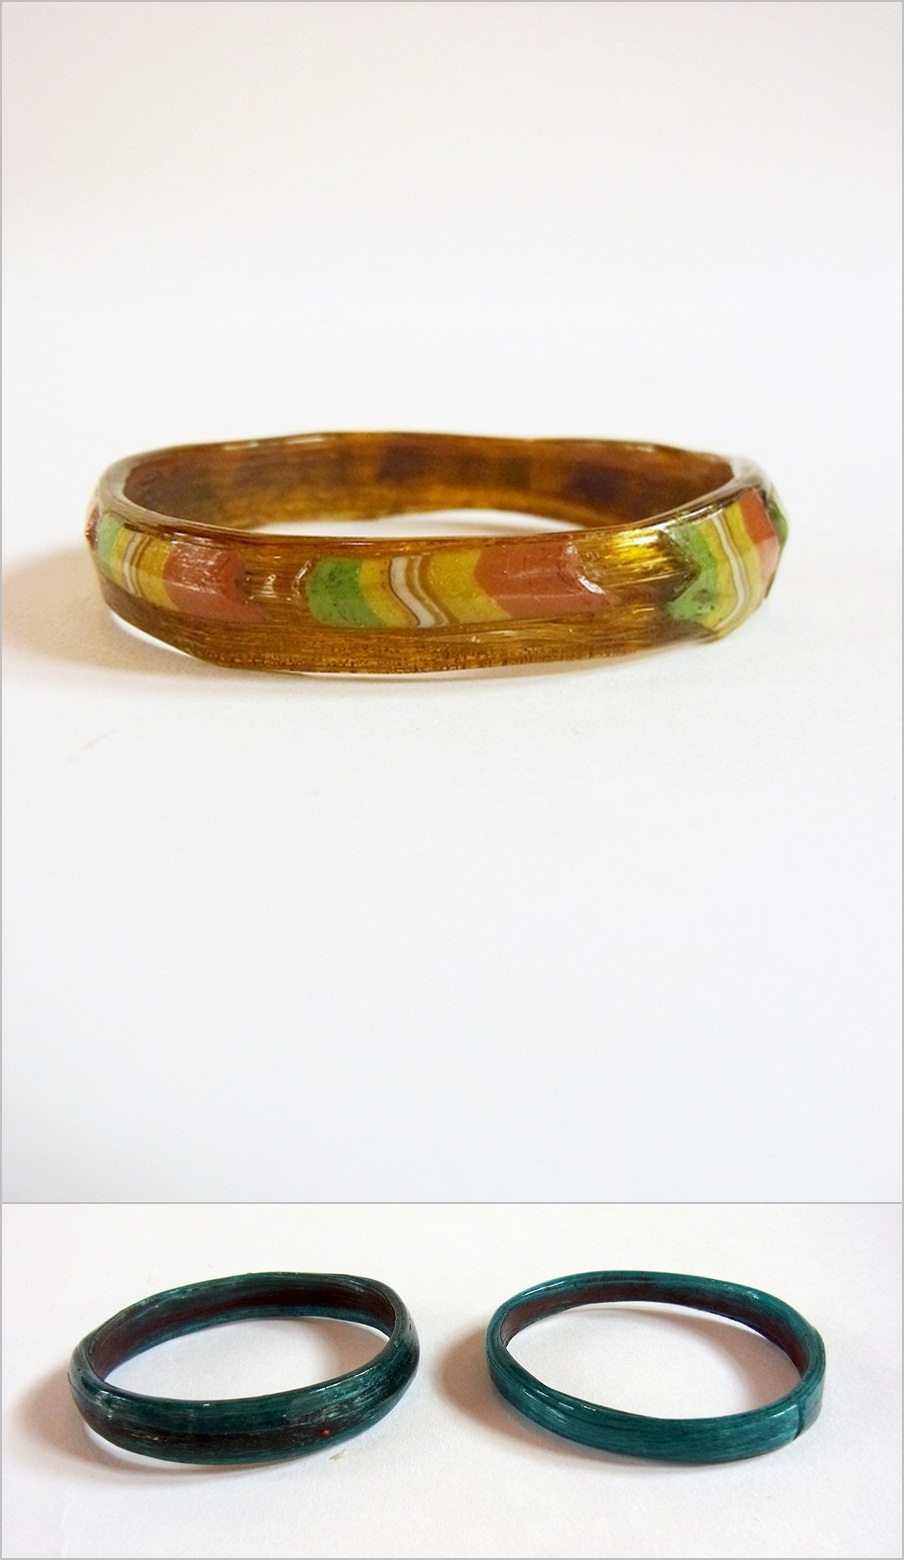 Roman amber coloured glass bangle with a